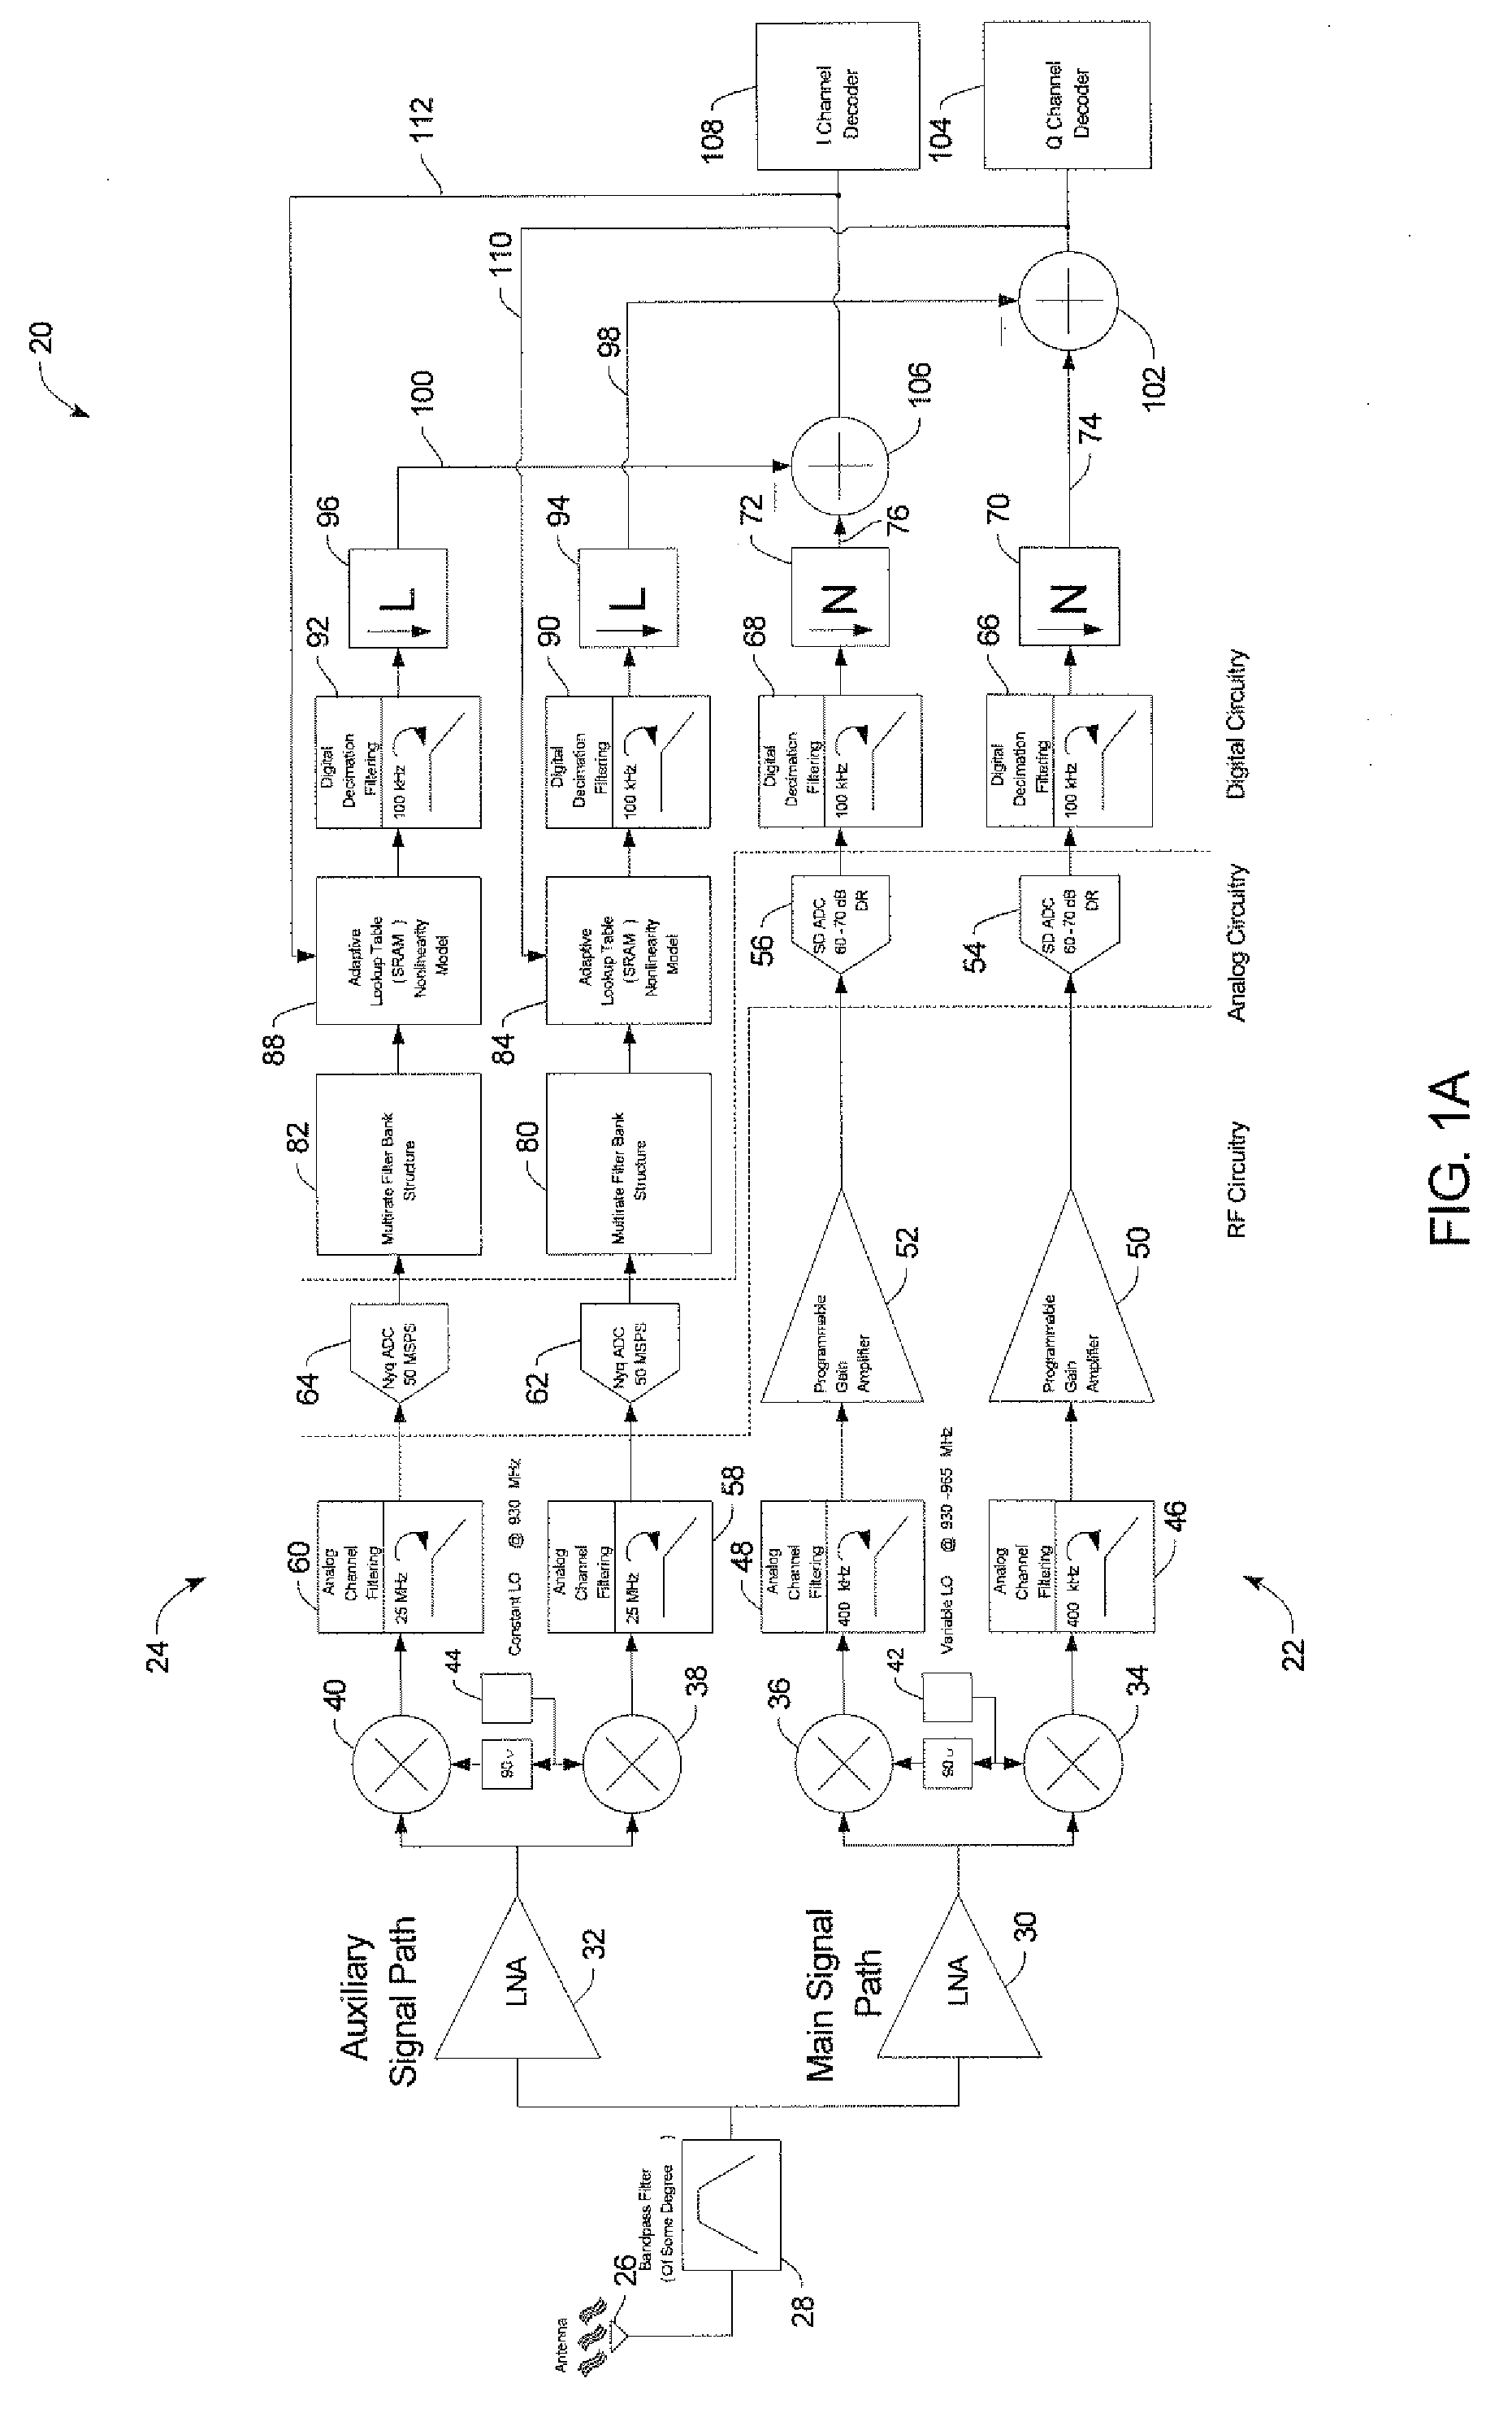 Digital and analog IM3 product compensation circuits for an RF receiver